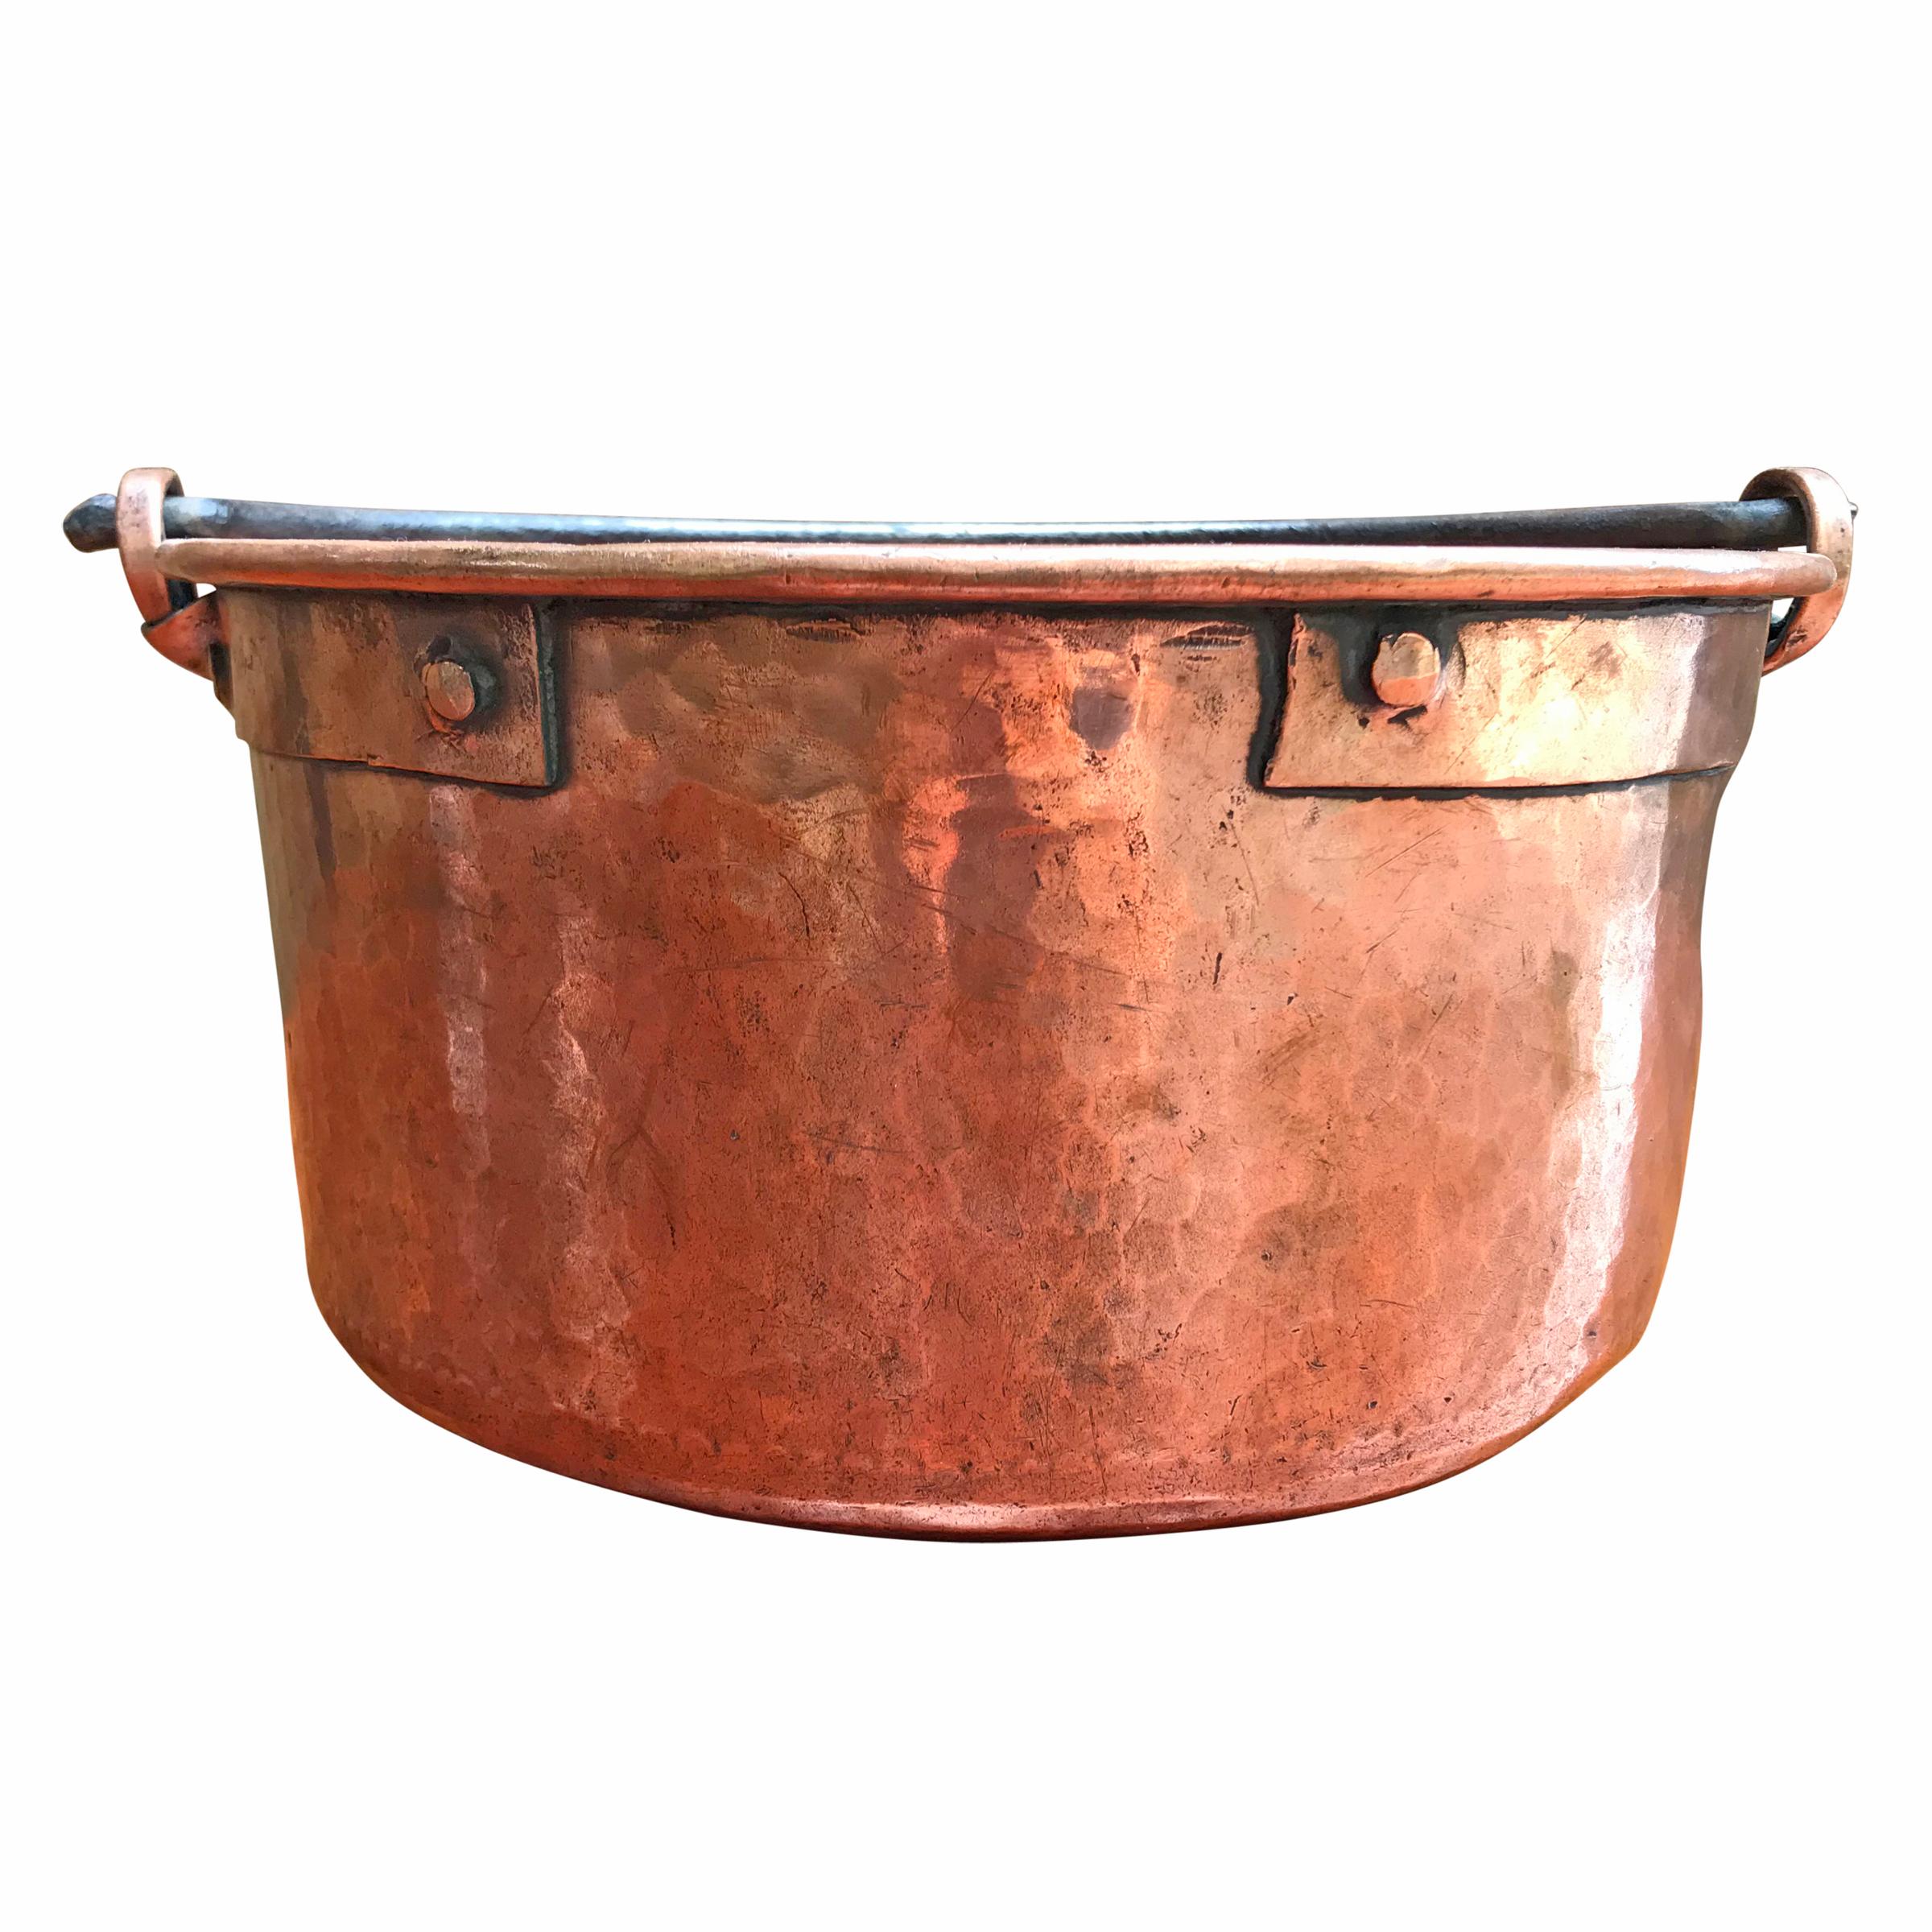 Primitive Early 19th Century French Hammered Copper Kettle For Sale